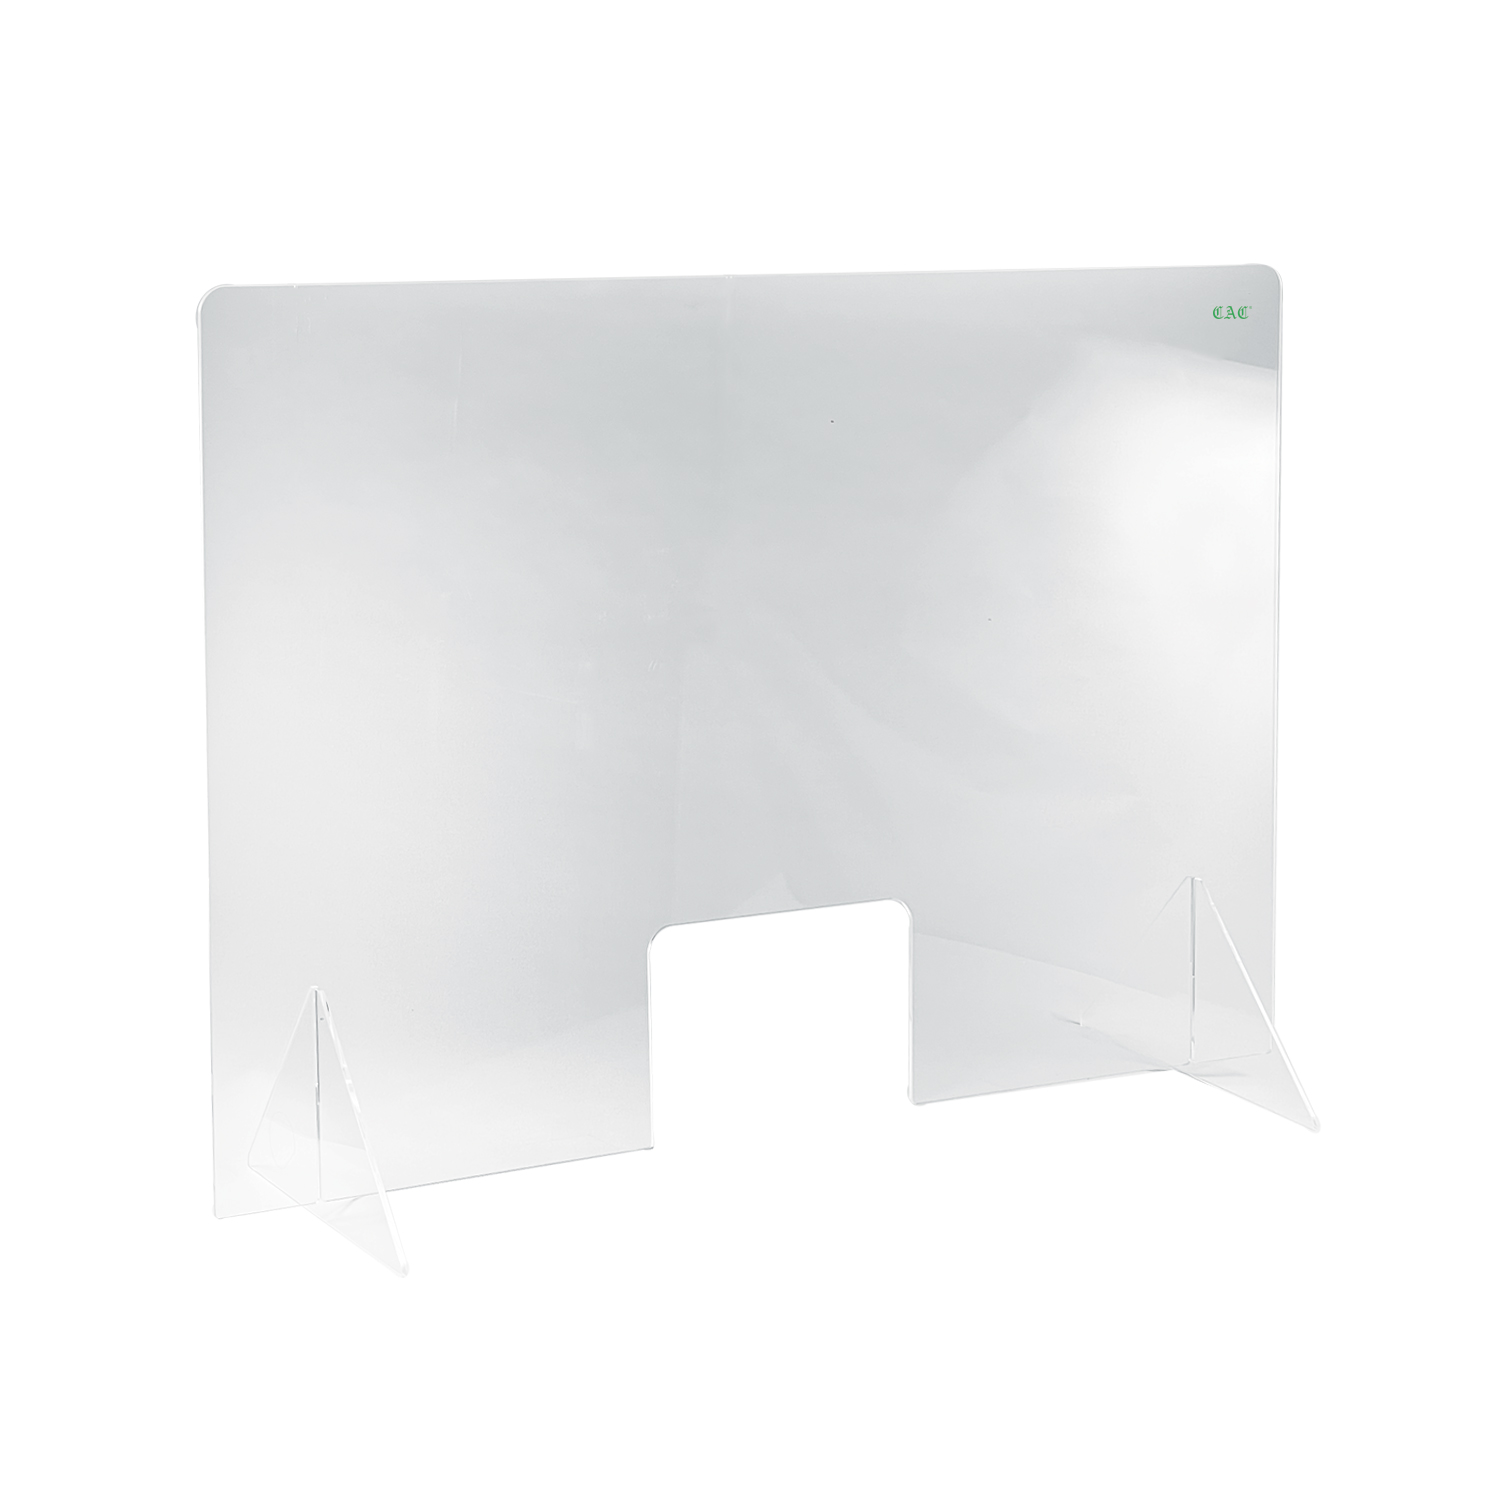 CAC China SHLD-4832 Self-Standing Acrylic Shield with Window 48" W x 32" H